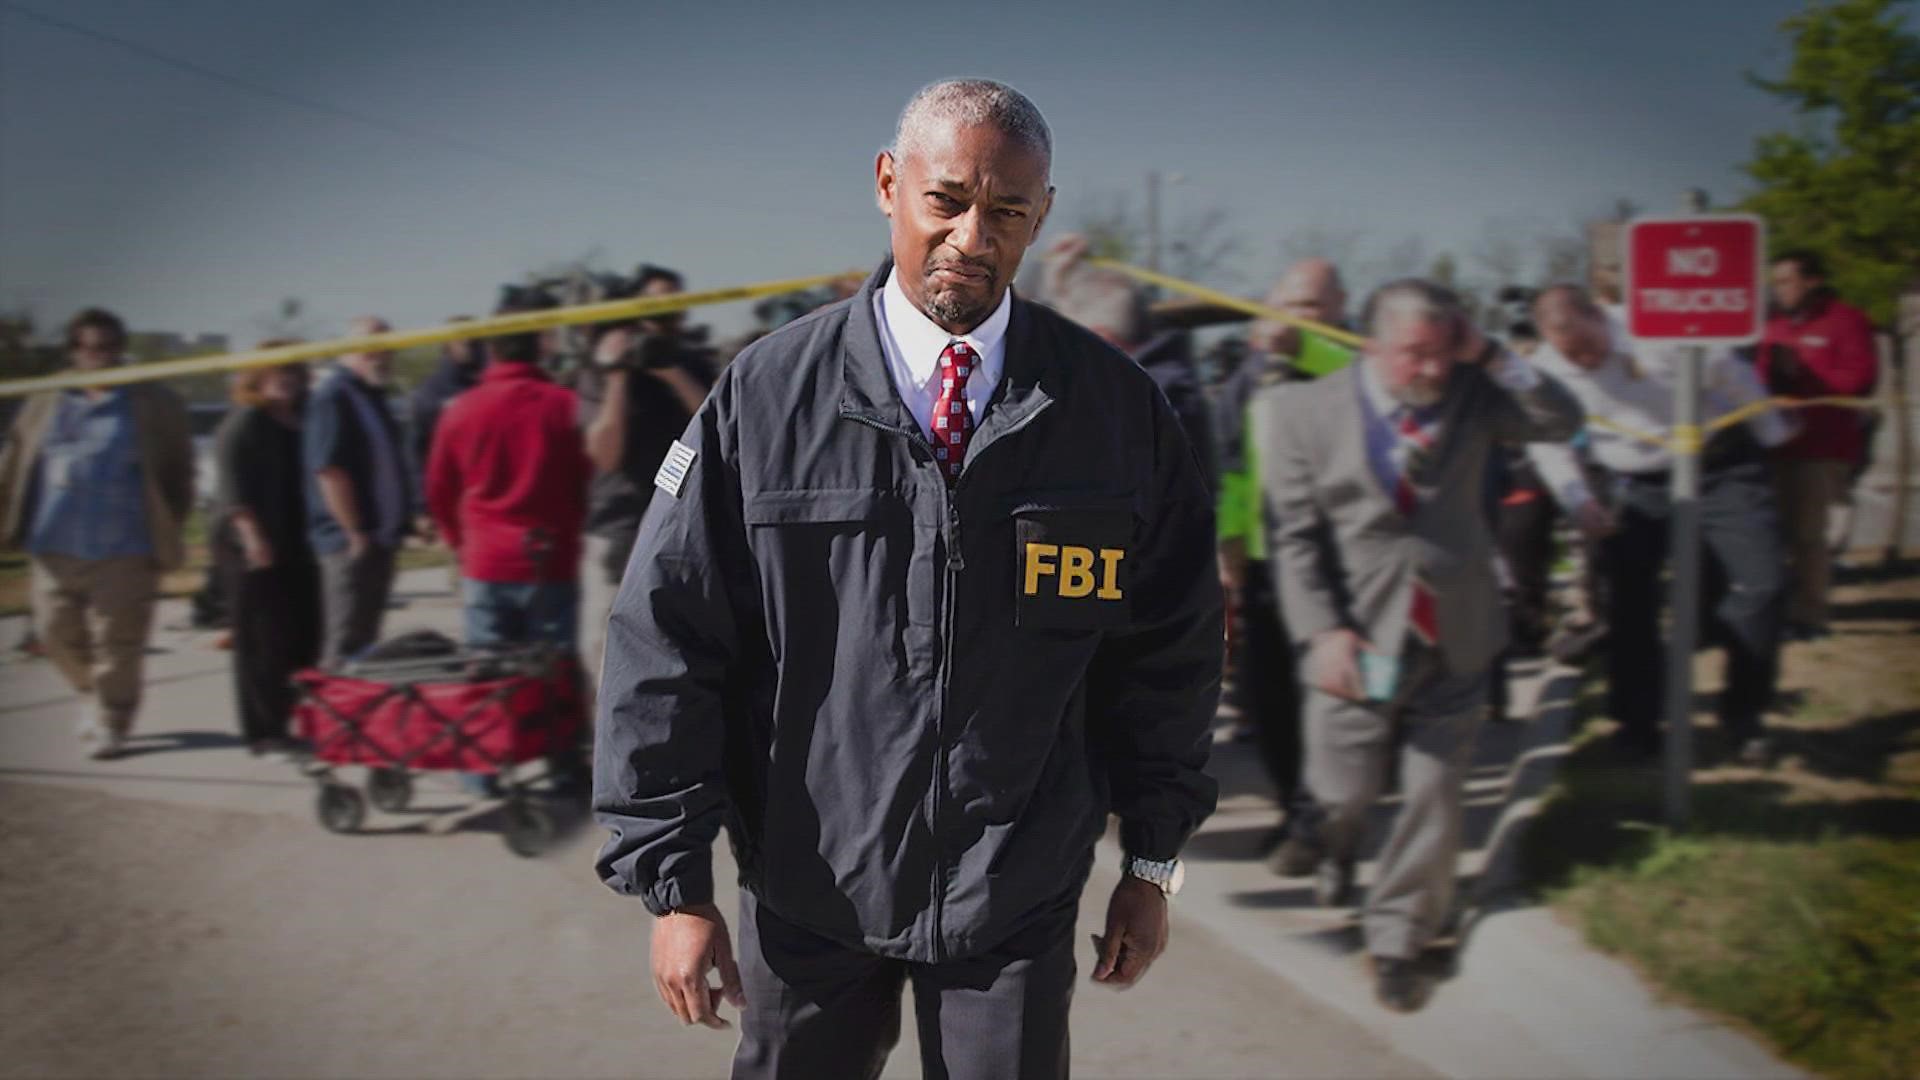 A new special agent is in charge at Houston's FBI office. His name is James Smith. He said going after drug dealers and gang members has always been in his blood.